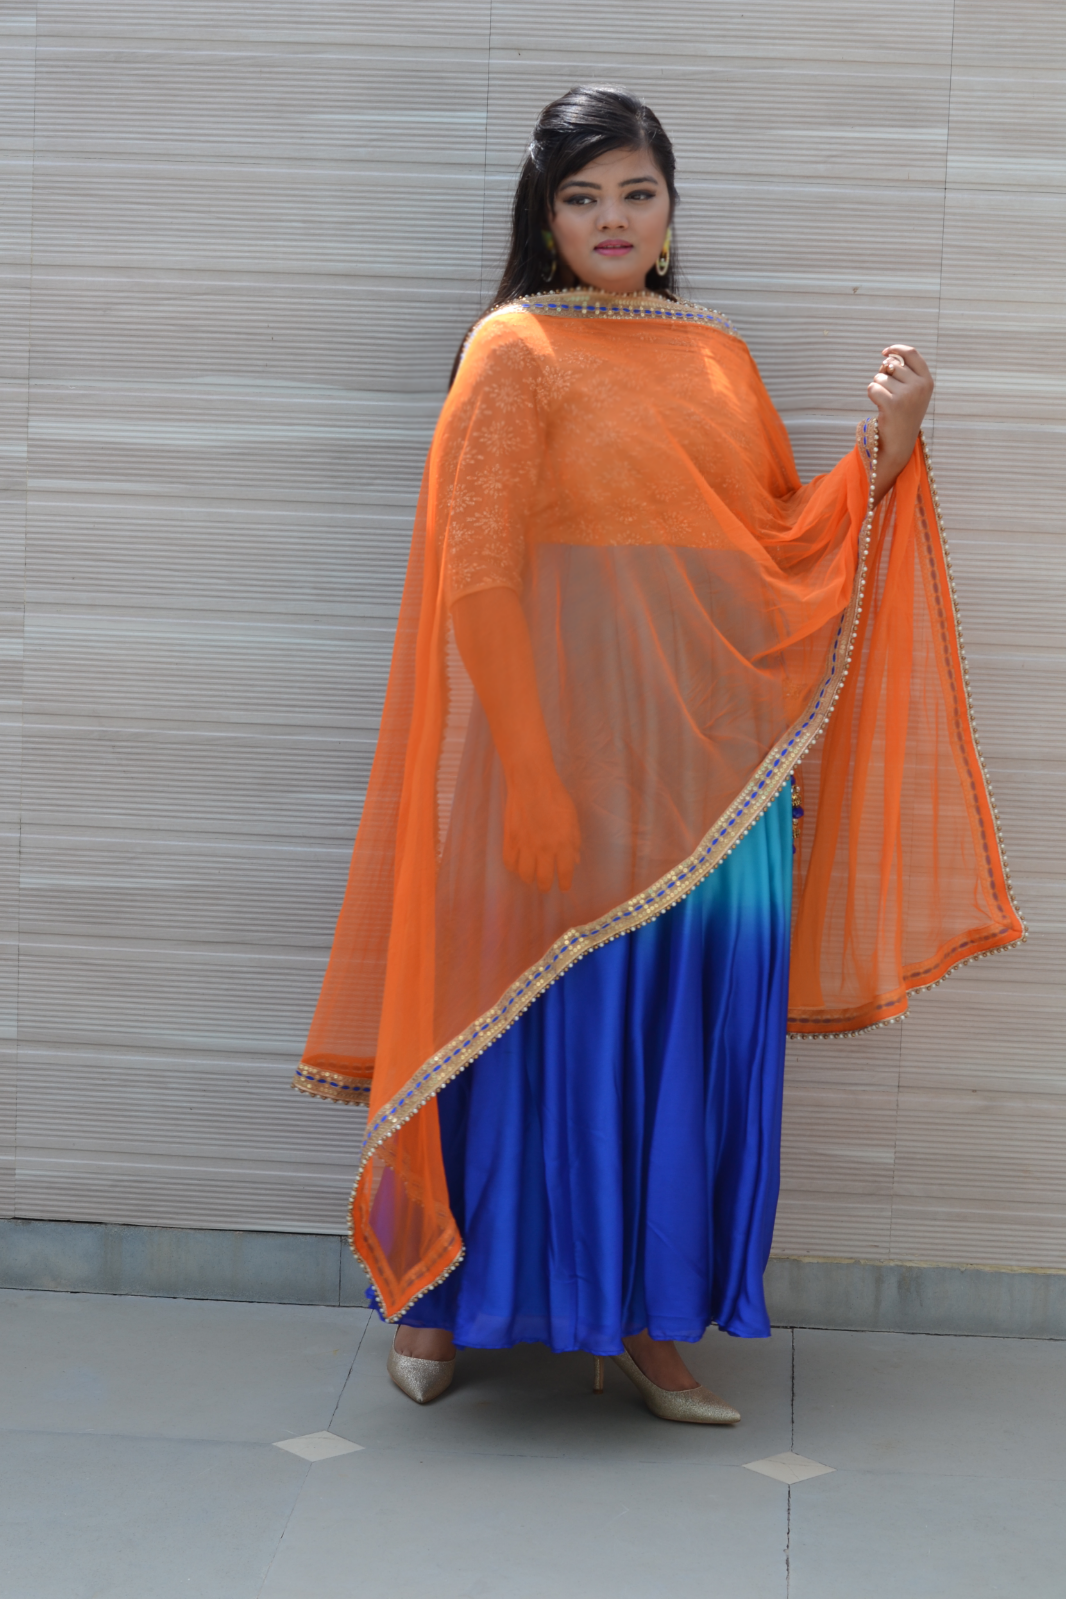 dupatta style on frock suit